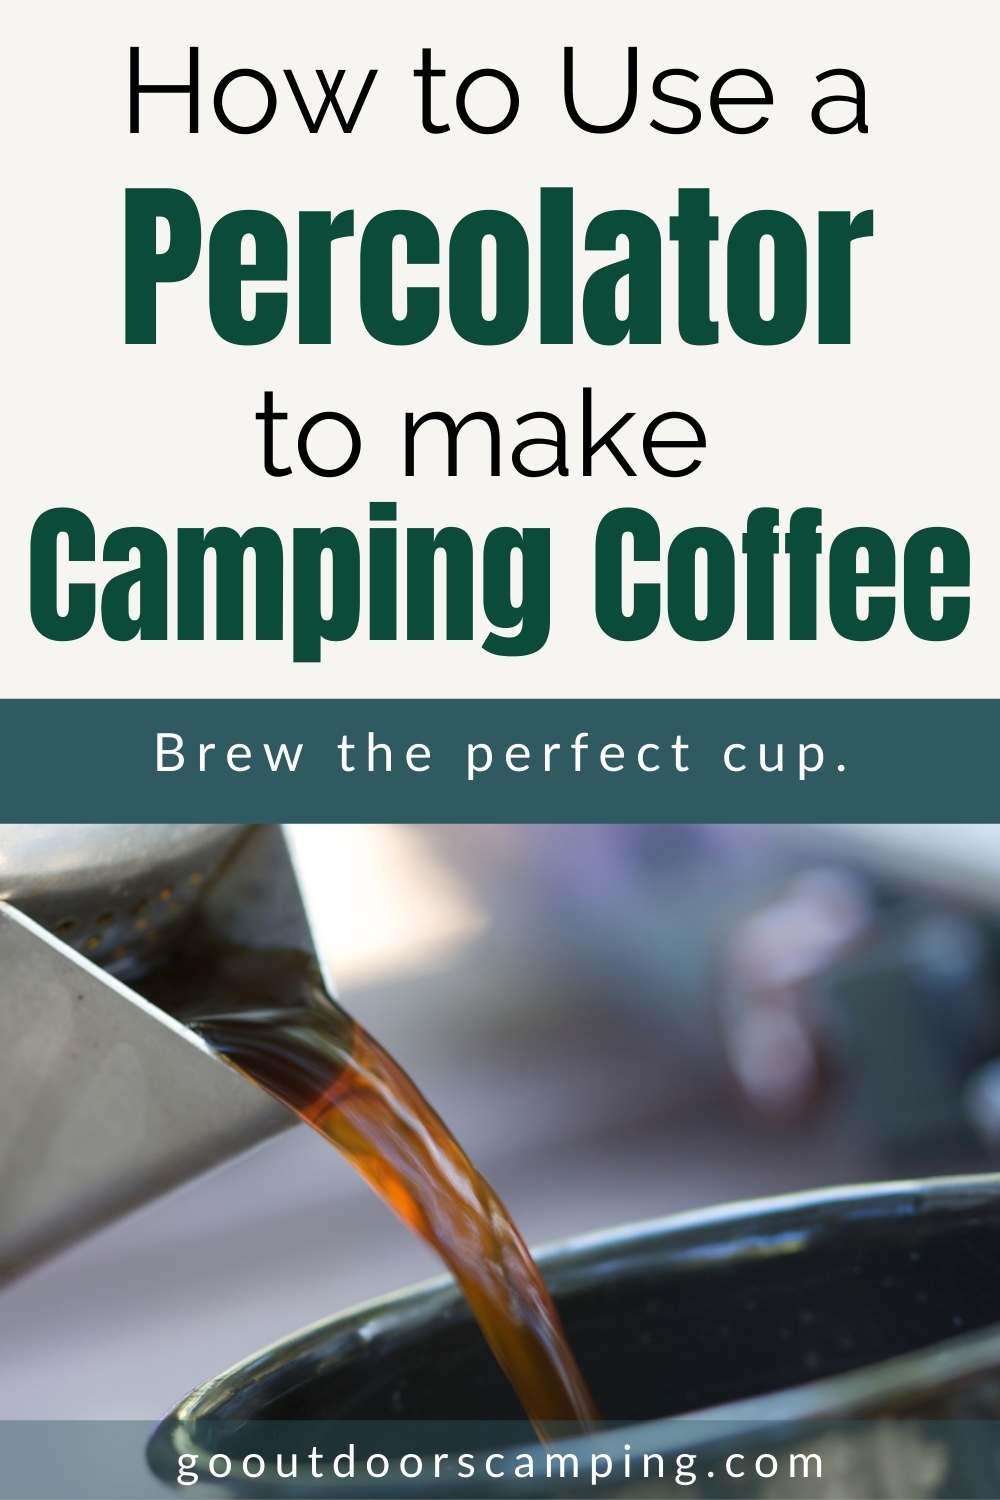 how to brew camping coffee with a percolator